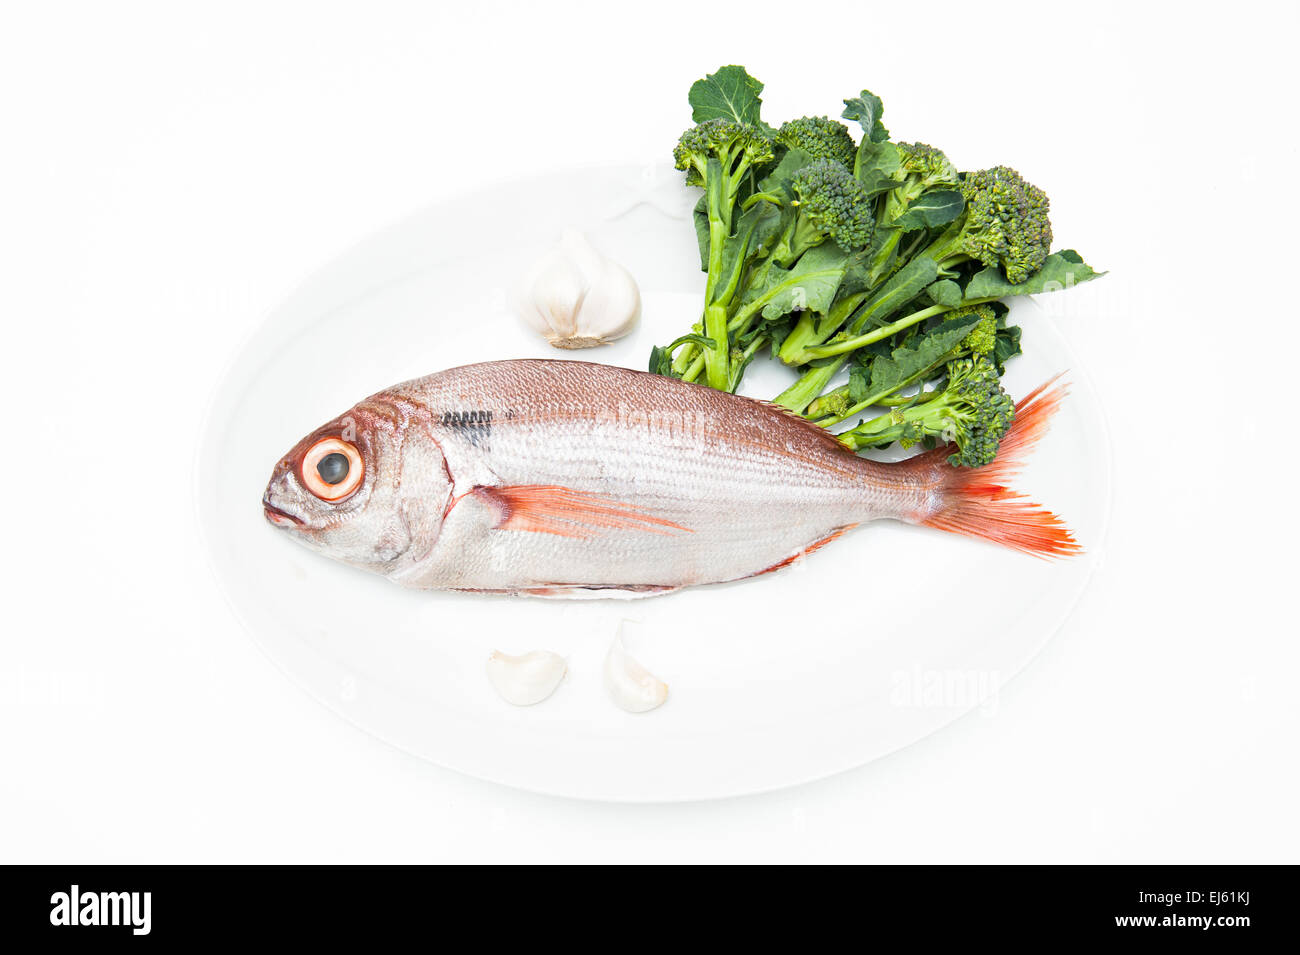 Pezzogna fish, variety of sea bream, on white plate with garlic and broccoli, white background Stock Photo